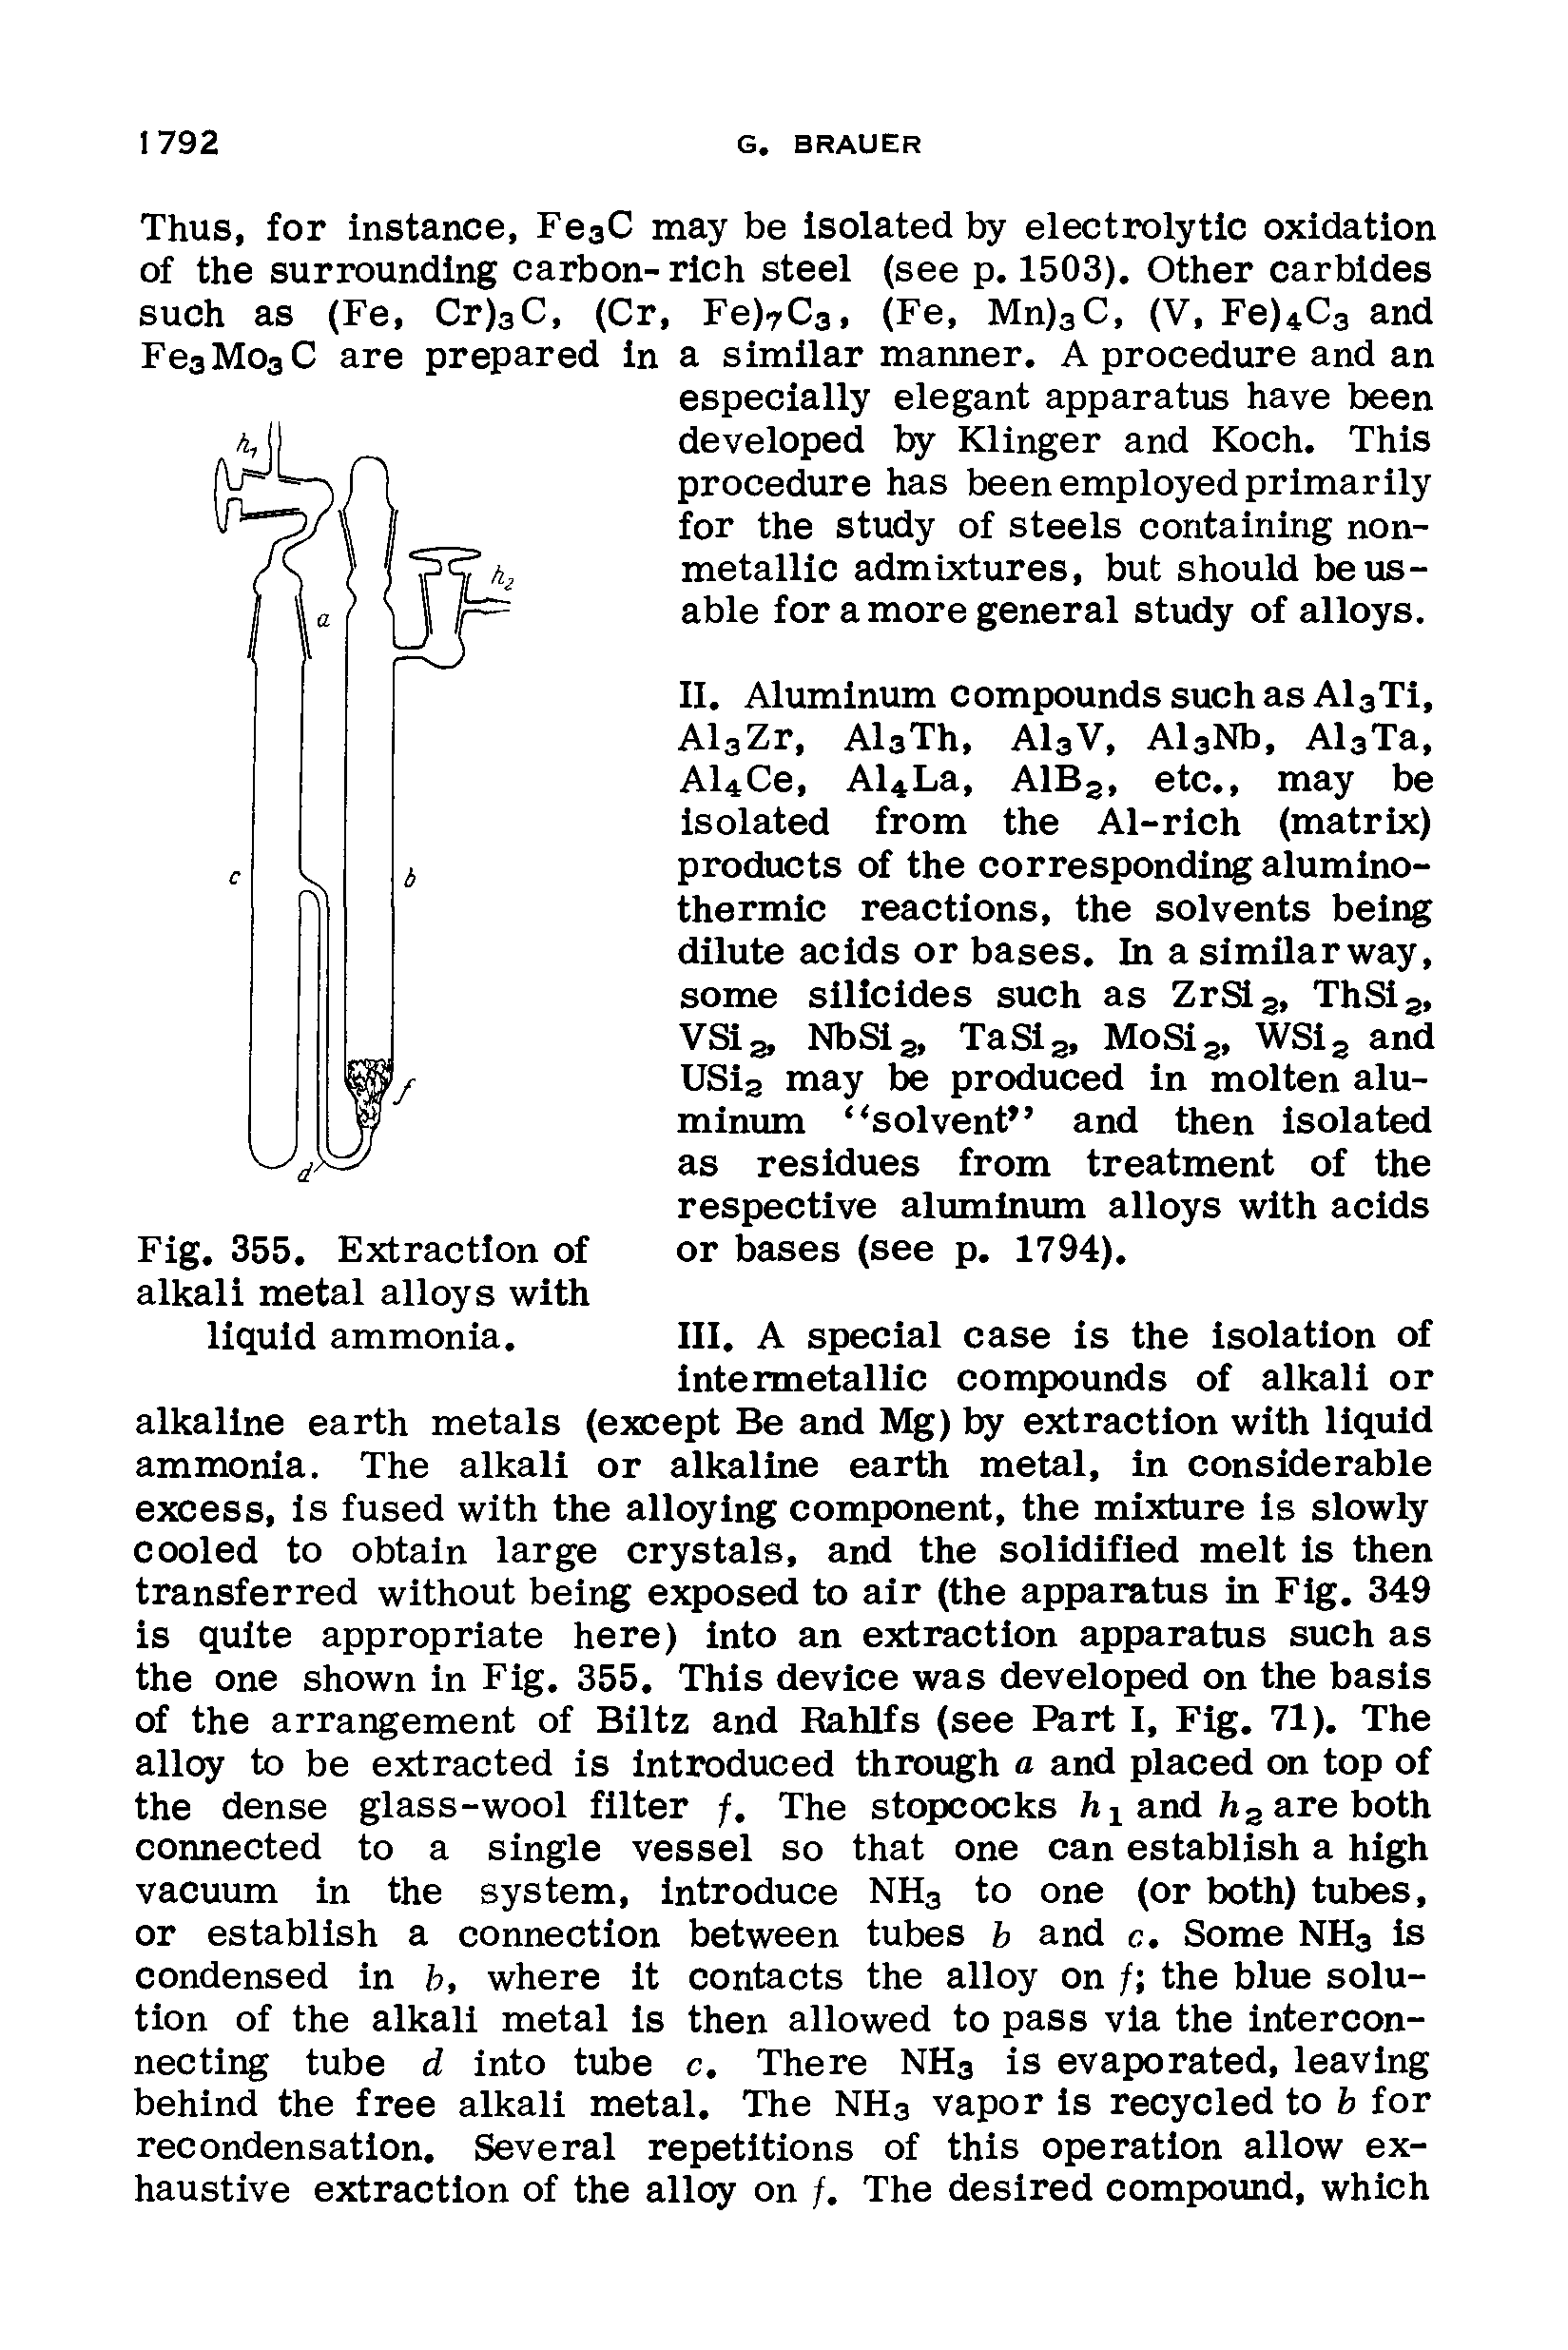 Fig. 355. Extraction of alkali metal alloys with liquid ammonia.